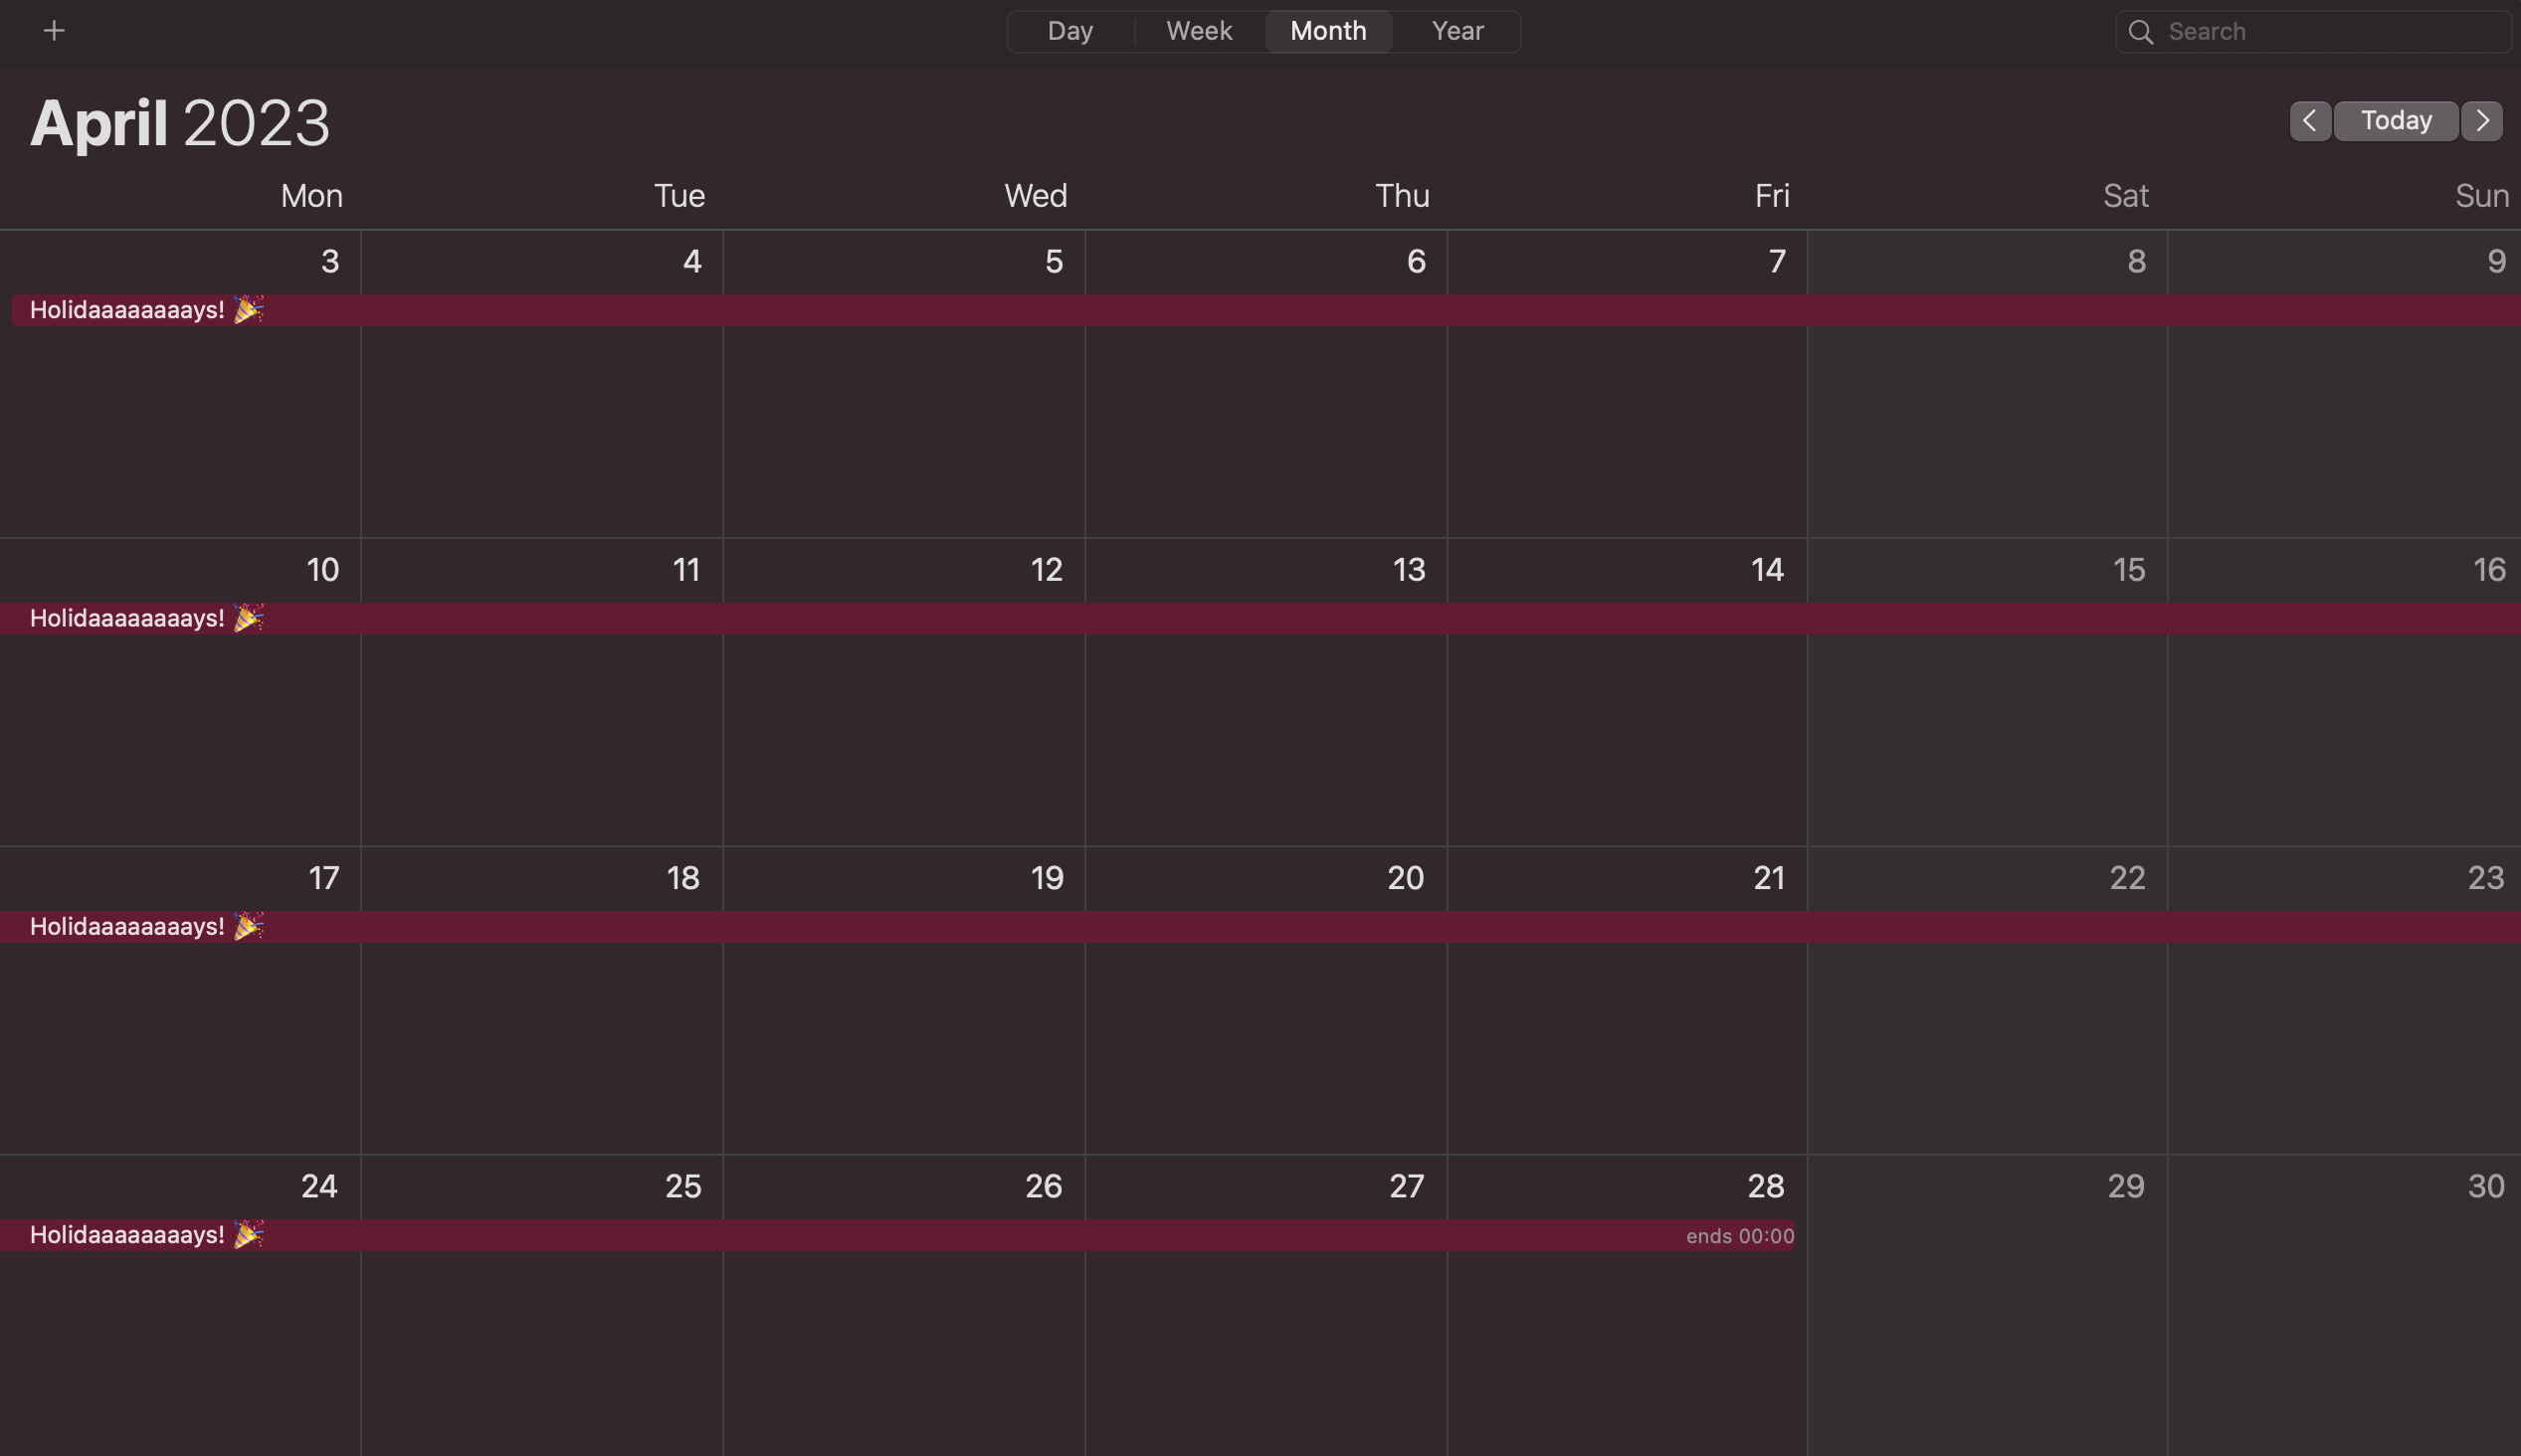 A screenshot of macOS's Calendar application showing an event called "Holidays" that goes for the entire month of April.